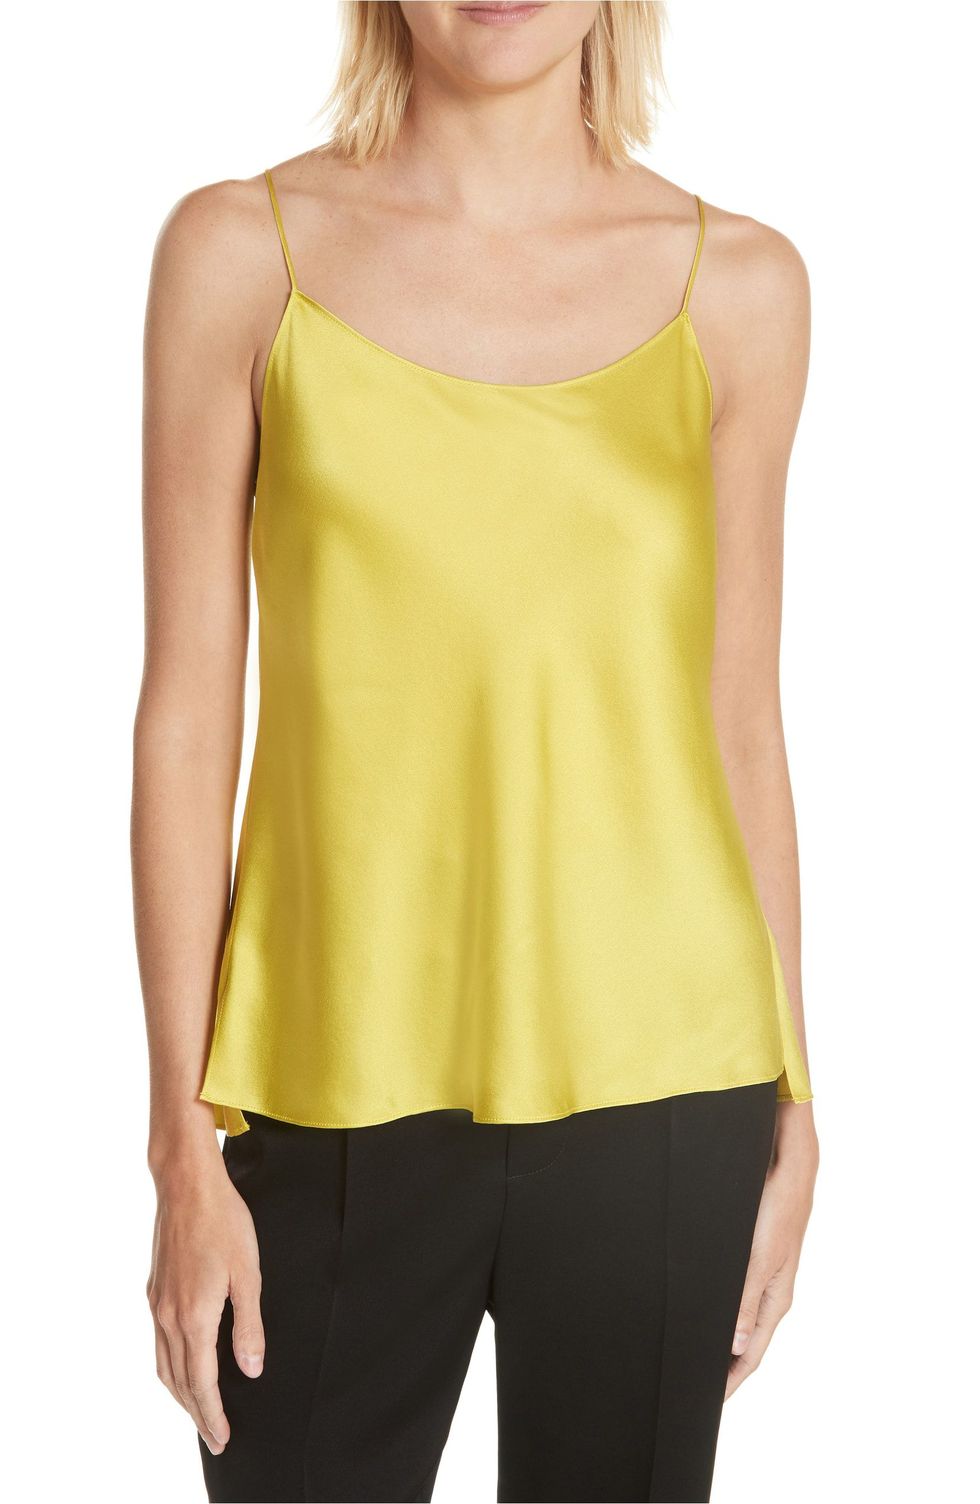 A Slinky Silk Cami that's Both Casual and Fancy